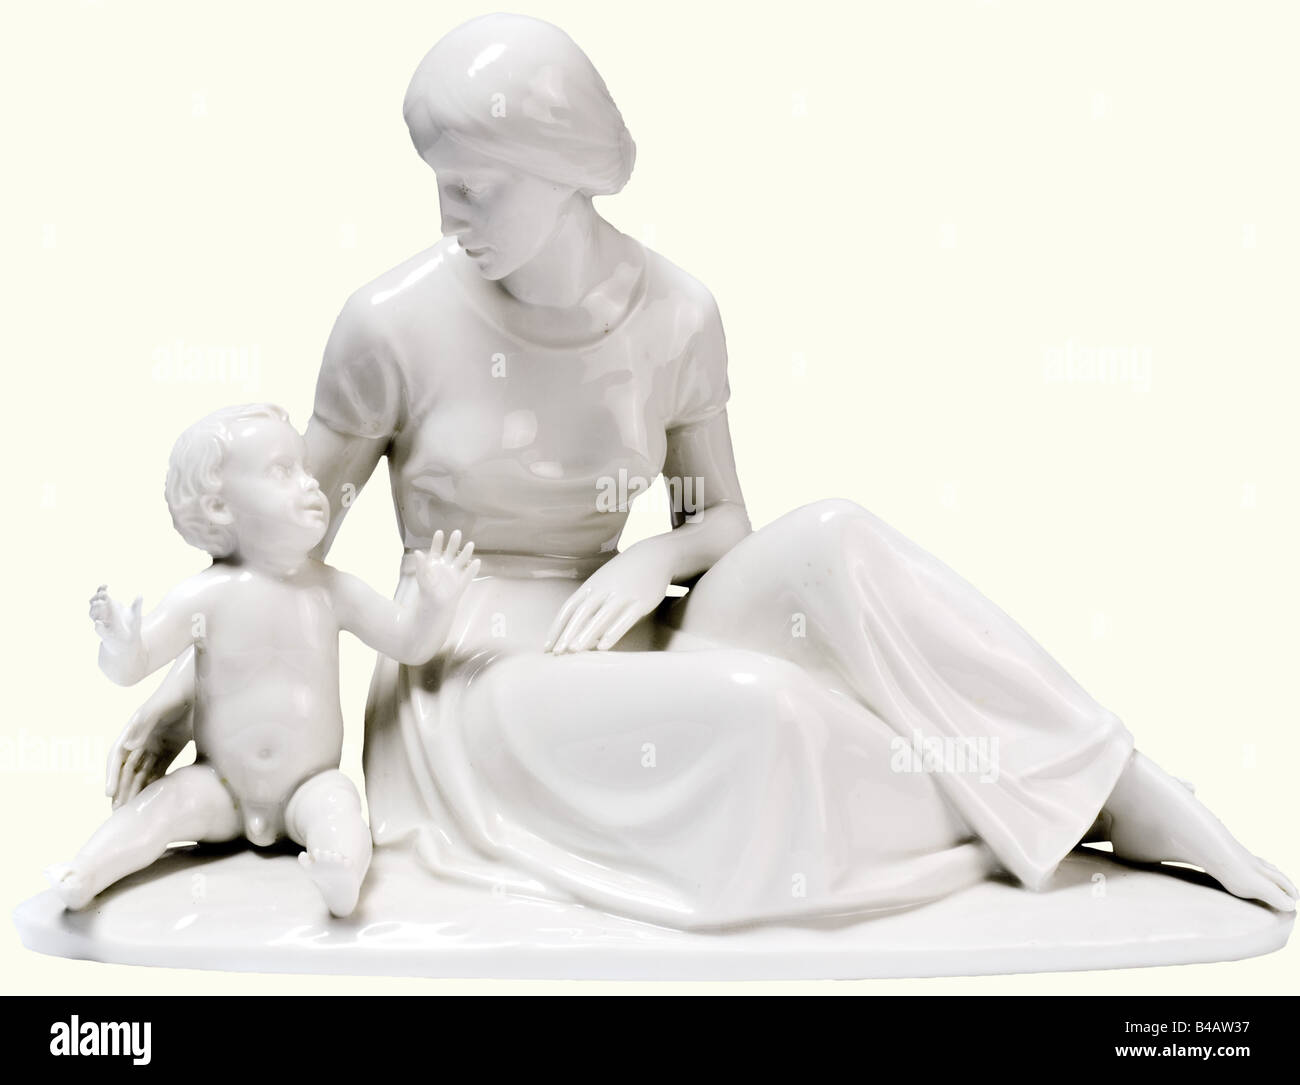 Mother and child., White porcelain figurine. Base with artist's signature 'P. Horn', green underglaze manufactory mark and model number '98'. Right hand of the child restored, otherwise unchipped, extremely decorative and very rare figurine. Height 22 cm.' fine arts, people, 1930s, 1930s, 20th century, object, objects, stills, clipping, clippings, cut out, cut-out, cut-outs, Additional-Rights-Clearance-Info-Not-Available Stock Photo